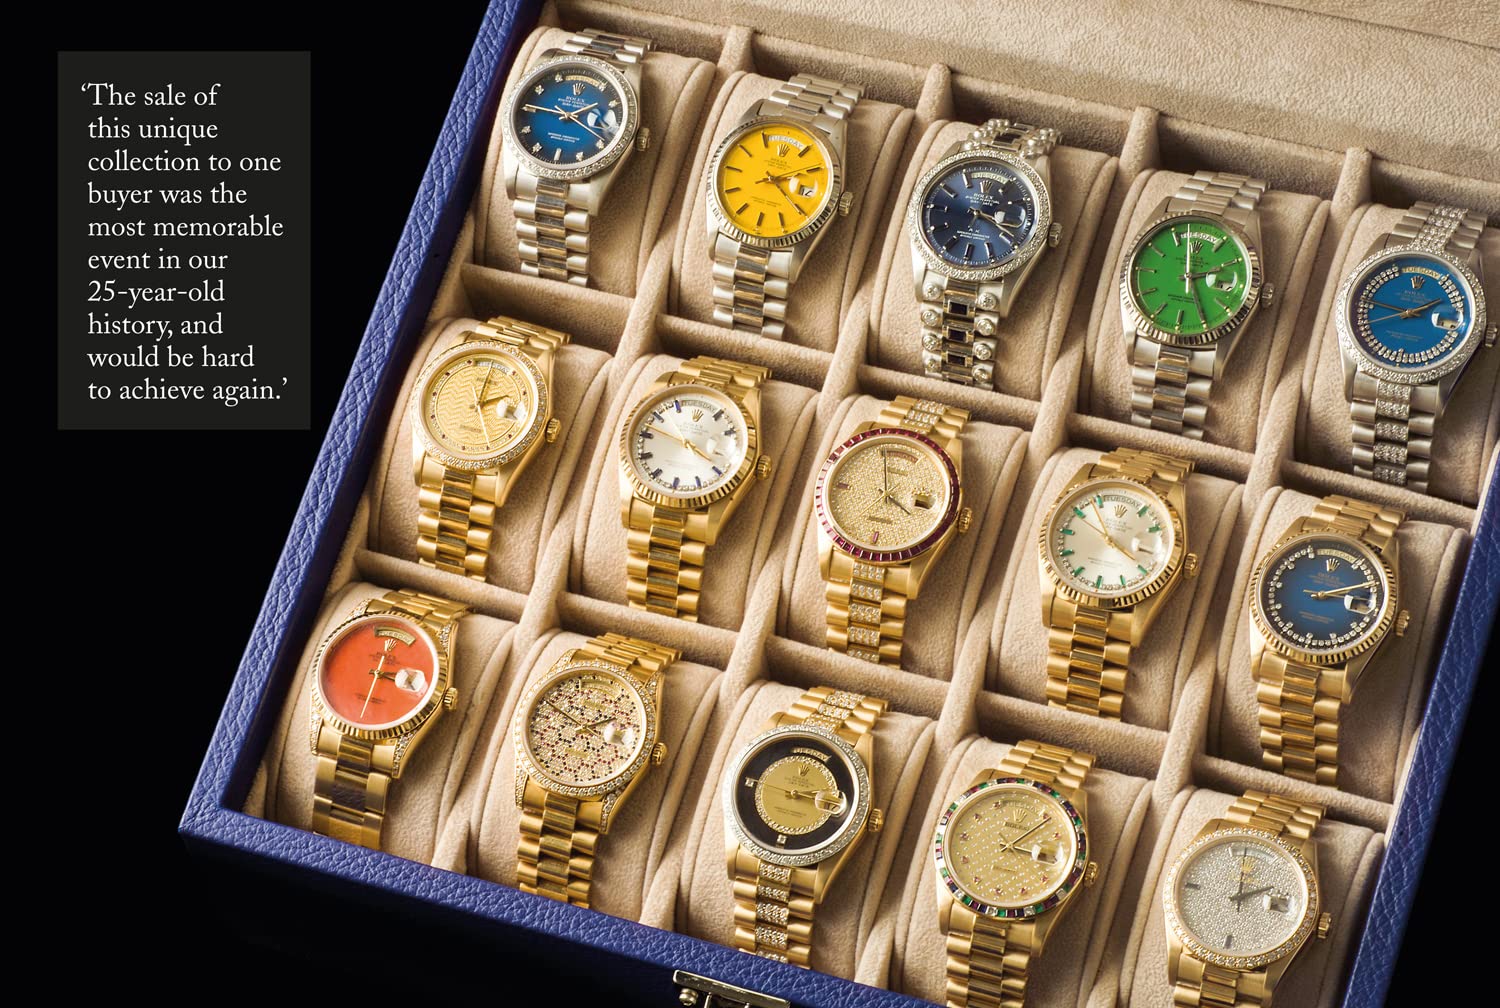 Vintage Rolex: The essential guide to the most iconic luxury watch brand of all time, Rolex.